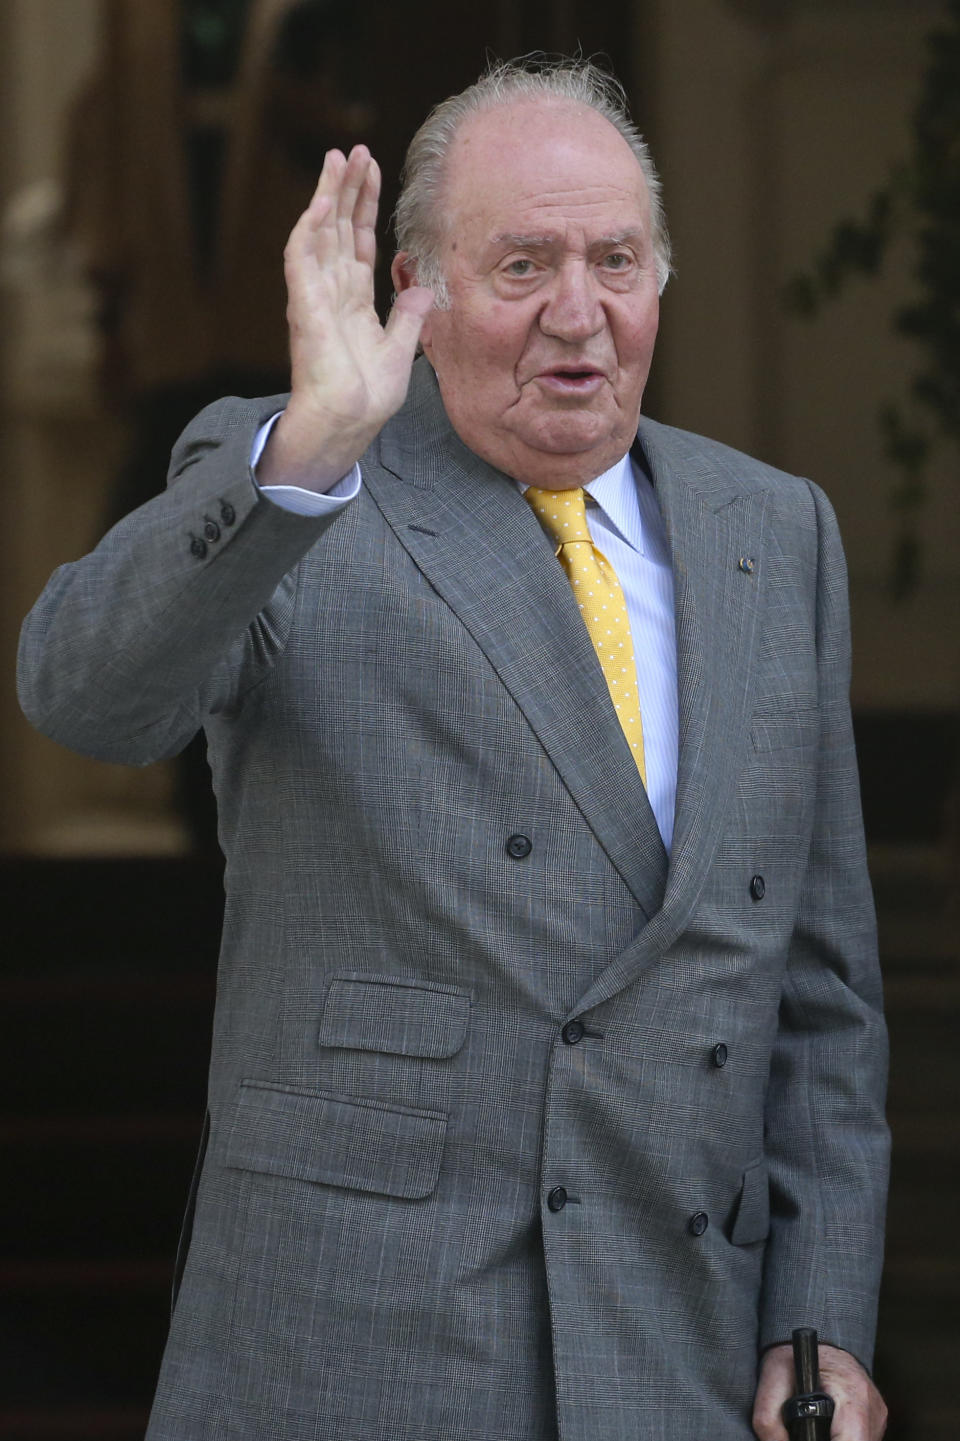 FILE - In this file photo dated Saturday, March 10, 2018, Spain's emeritus King Juan Carlos waves upon his arrival to the Academia Diplomatica de Chile, in Santiago. Spain's royal family’s website on Monday Aug. 3, 2020, published a letter from Spain’s former monarch, King Juan Carlos I, saying he is leaving Spain to live in another country, amidst a financial scandal. (AP Photo/Esteban Felix, FILE)